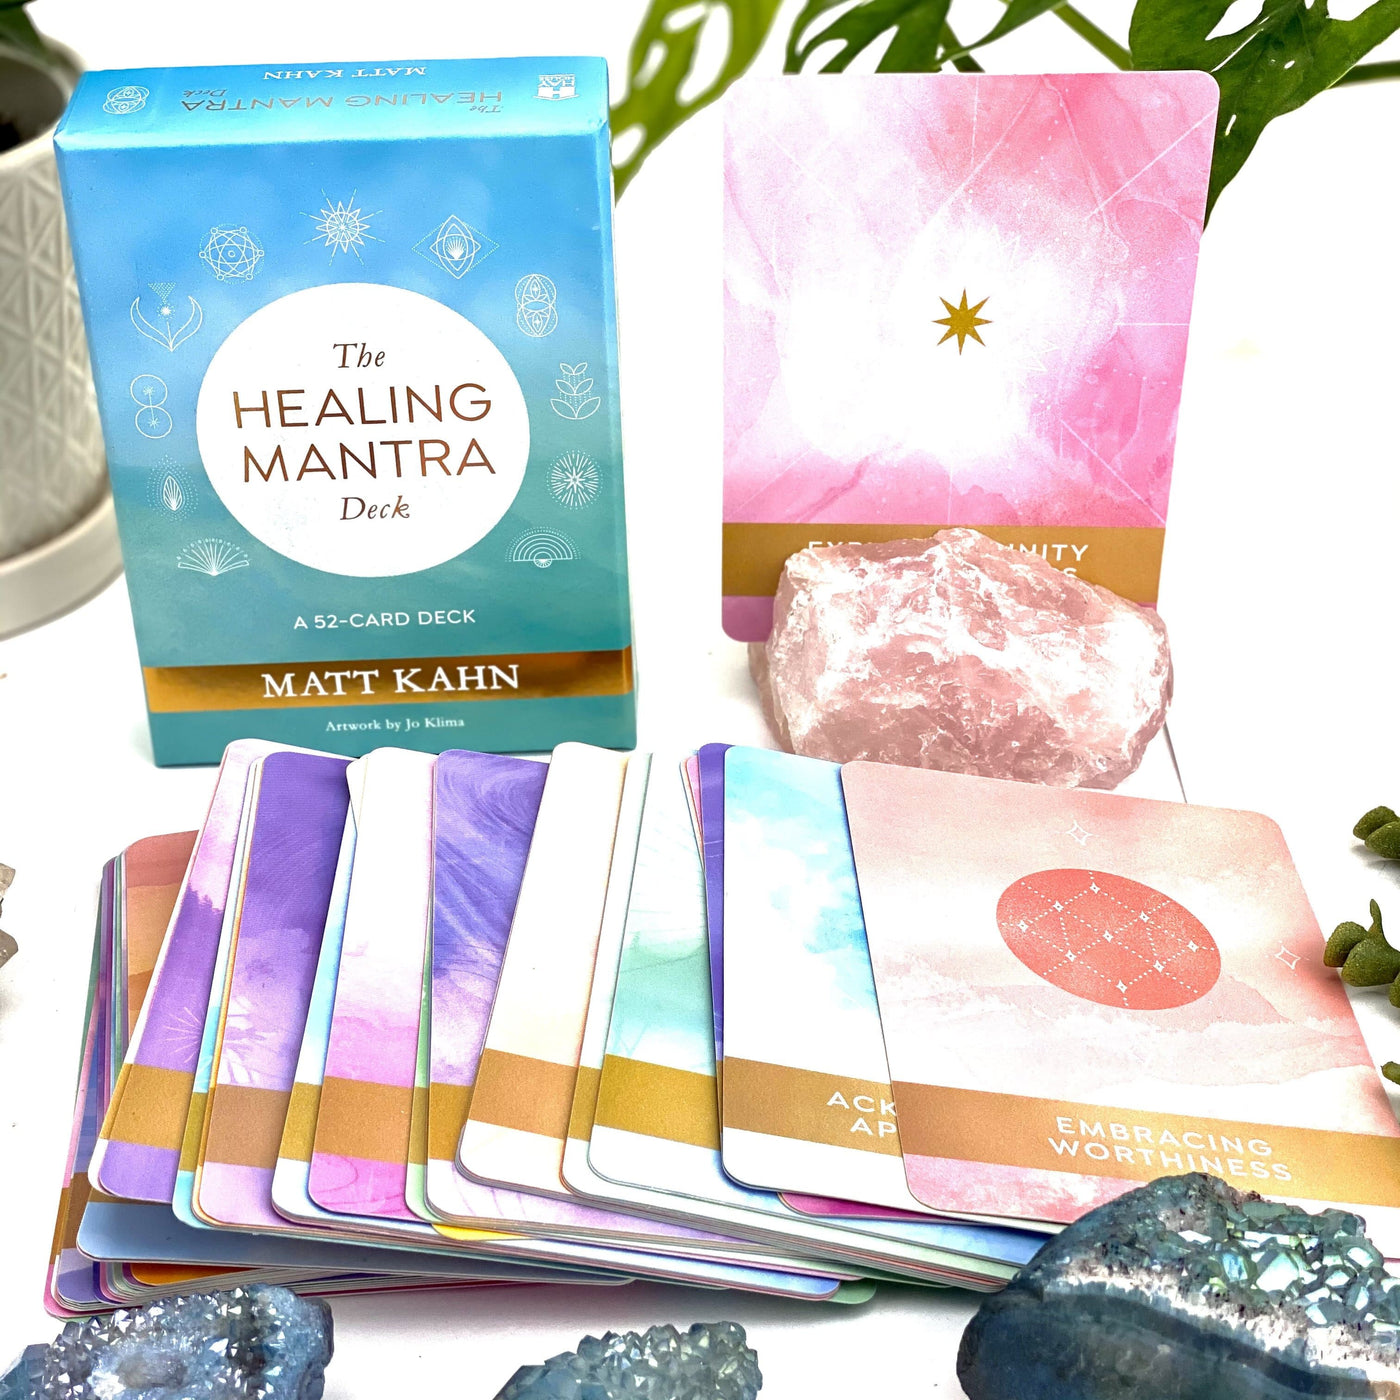 The Healing Mantra Card Deck in teal color box with a pink book and cards on a flat surface to see , colors of cards are in pink teal purple, and green